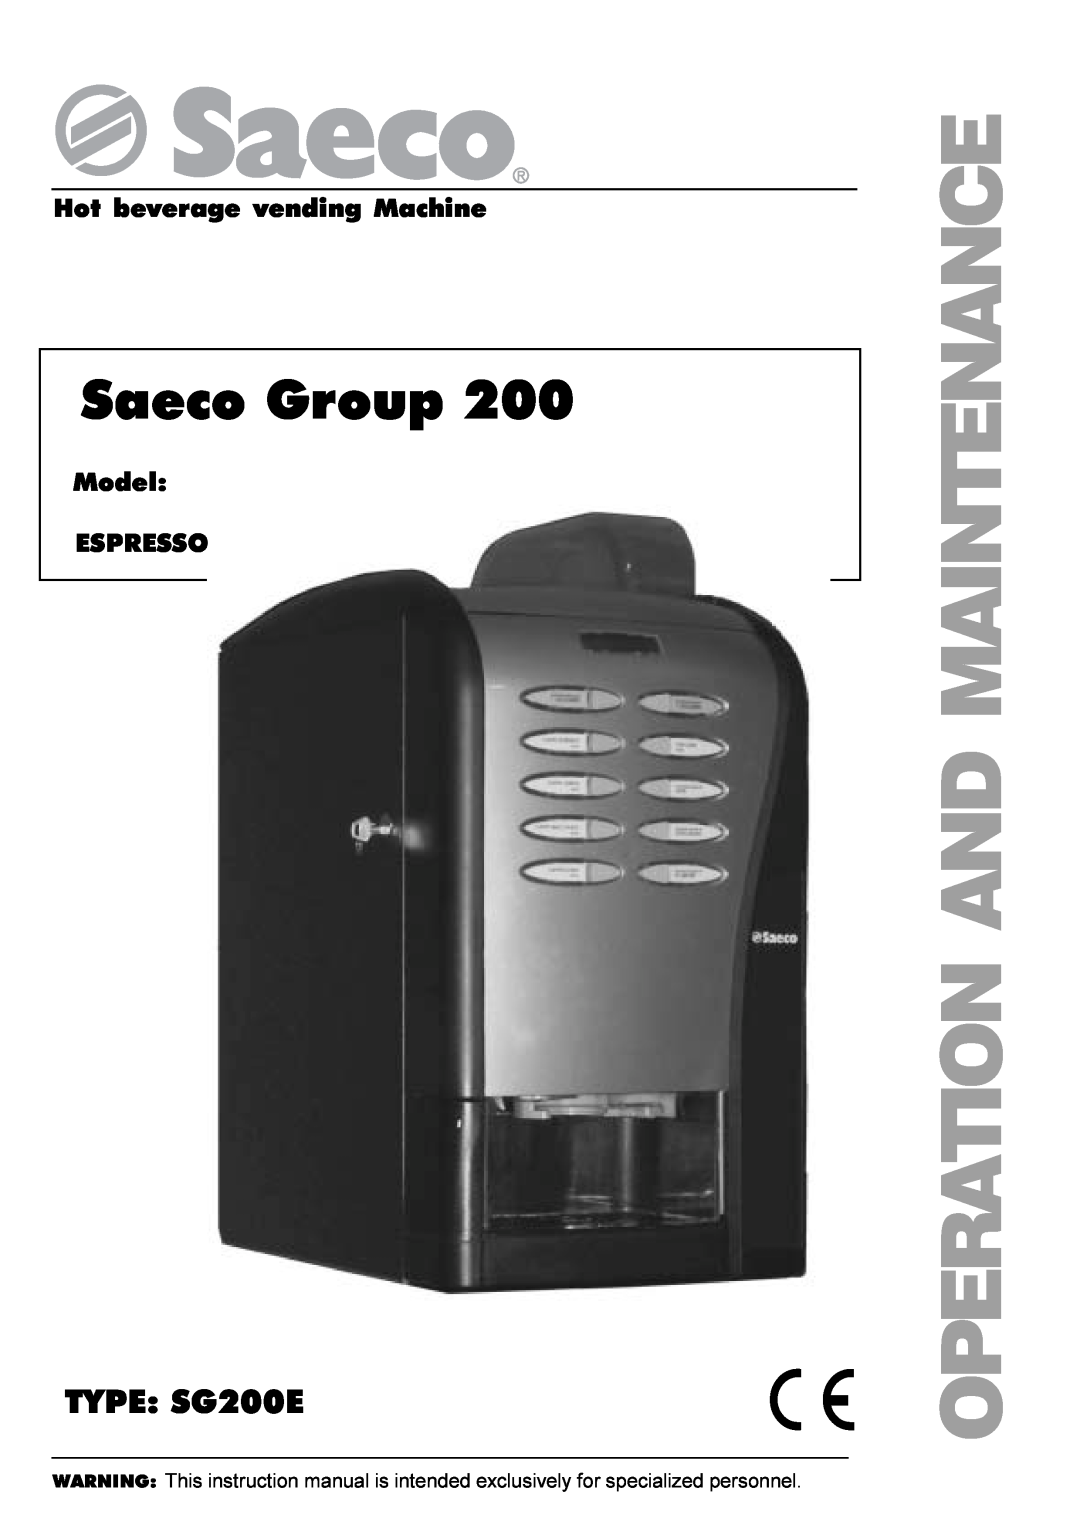 Saeco Coffee Makers instruction manual TYPE SG200E, Operation And Maintenance, Saeco Group, Model ESPRESSO 